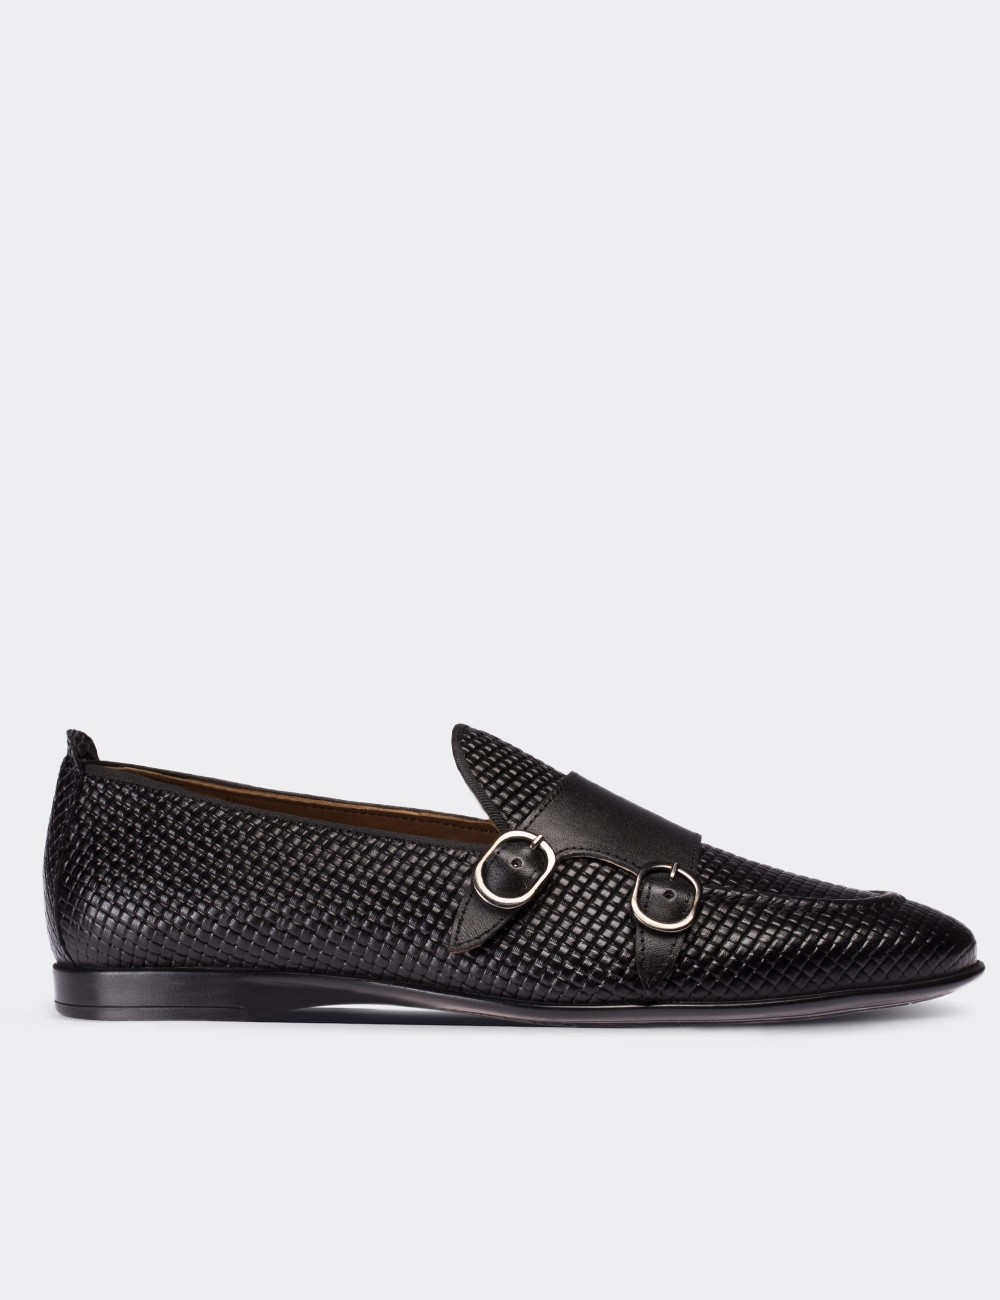 Black  Leather Double Monk Strap Loafers - 01704MSYHC03